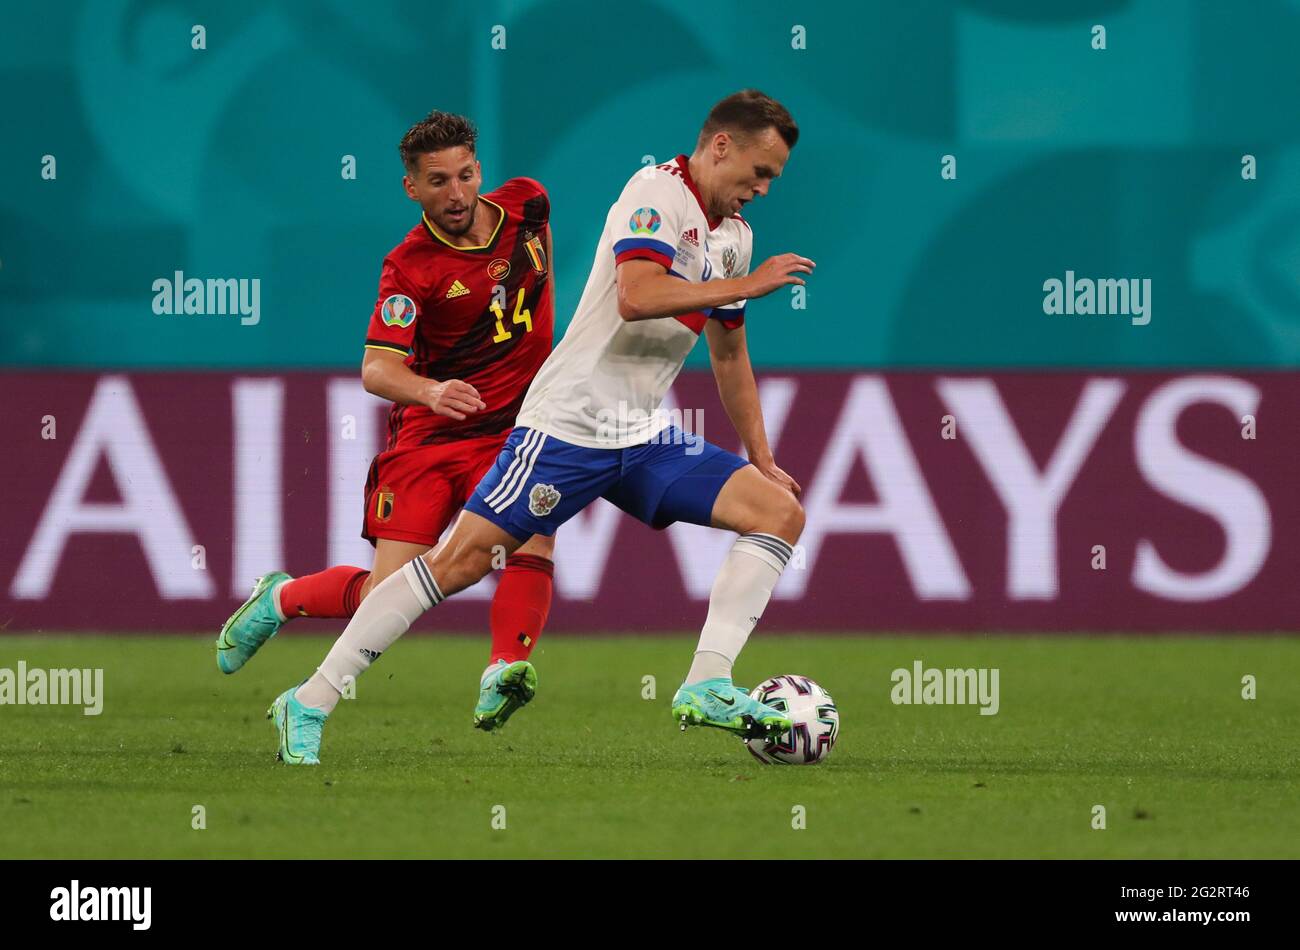 12 June 2021, Russia, St. Petersburg: Football: European Championship, Belgium - Russia, preliminary round, Group B, Matchday 1 at St. Petersburg Stadium. Denis Cheryshev (Russia) and Dries Mertens (Belgium, l) in action. Important: For editorial news reporting purposes only. Not used for commercial or marketing purposes without prior written approval of UEFA. Images must appear as still images and must not emulate match action video footage. Photographs published in online publications (whether via the Internet or otherwise) shall have an interval of at least 20 seconds between the posting. P Stock Photo